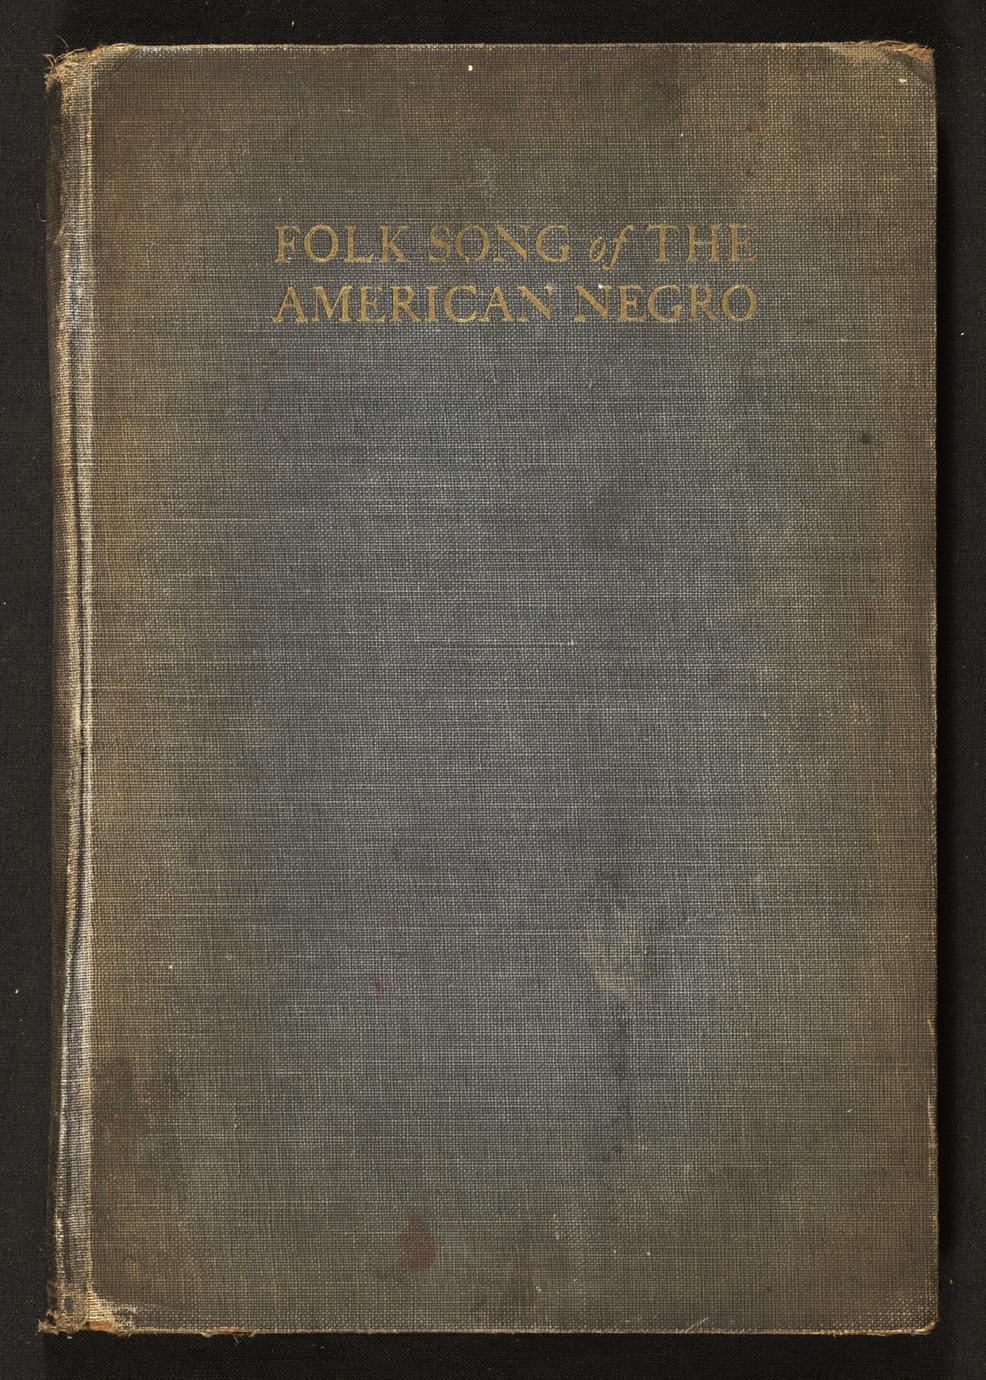 Folk song of the American Negro